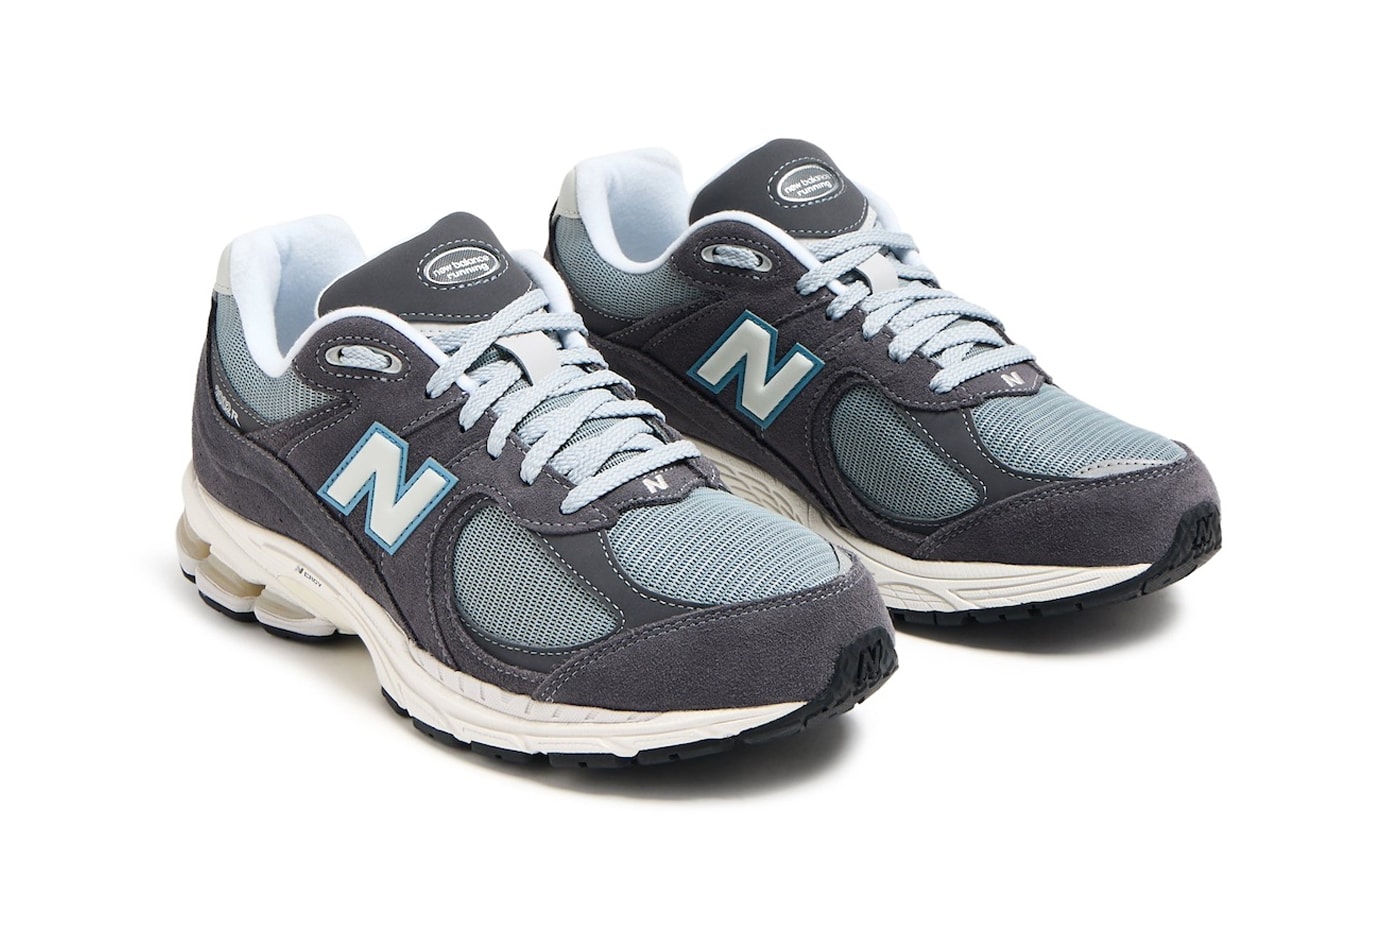 New Balance 2002R Surfaces in "Steel Blue" M2002RFB Magnet/Steel Blue running shoes sneakers everyday nb